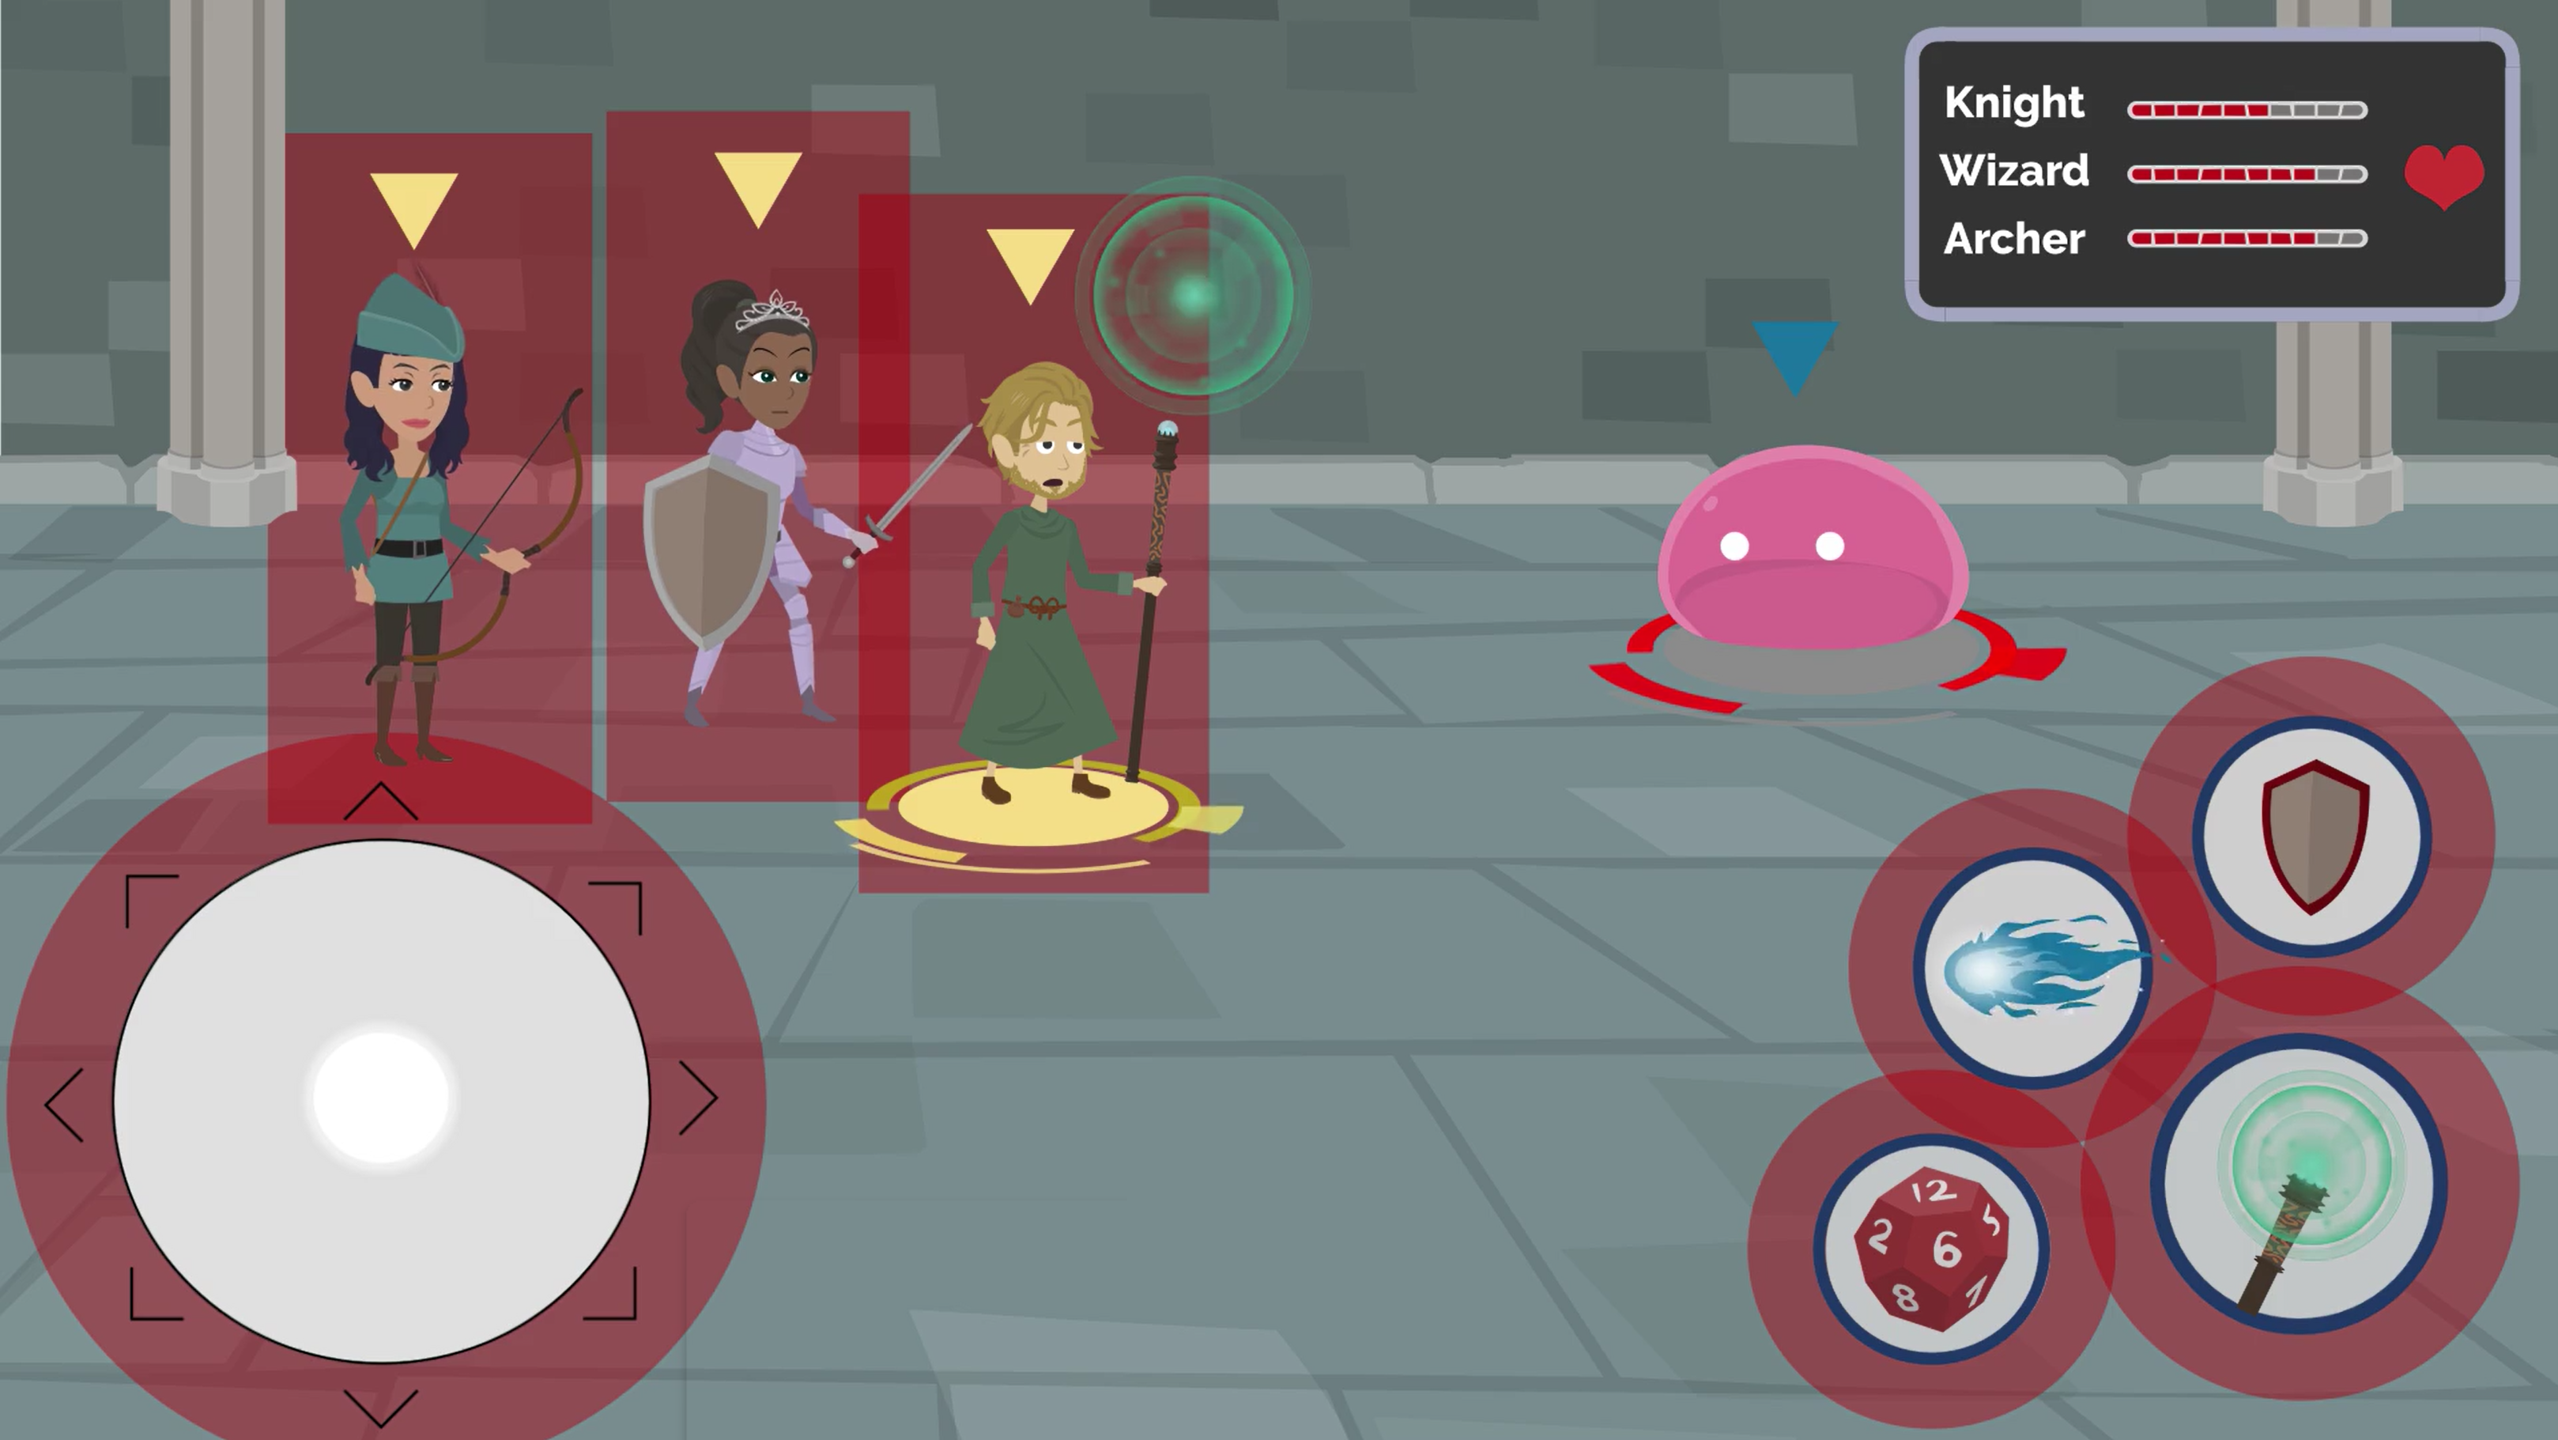 Screenshot of a fictional roleplaying game with virtual joystick in lower left and the 3 party characters in the top left. In the lower right are touch targets for in-game skills and a slime enemy near the top right. The joystick and skills have circular red, semi-transparent circles surrounding them. And the party characters each have a red, semi-transparent rectangle surrounding them.